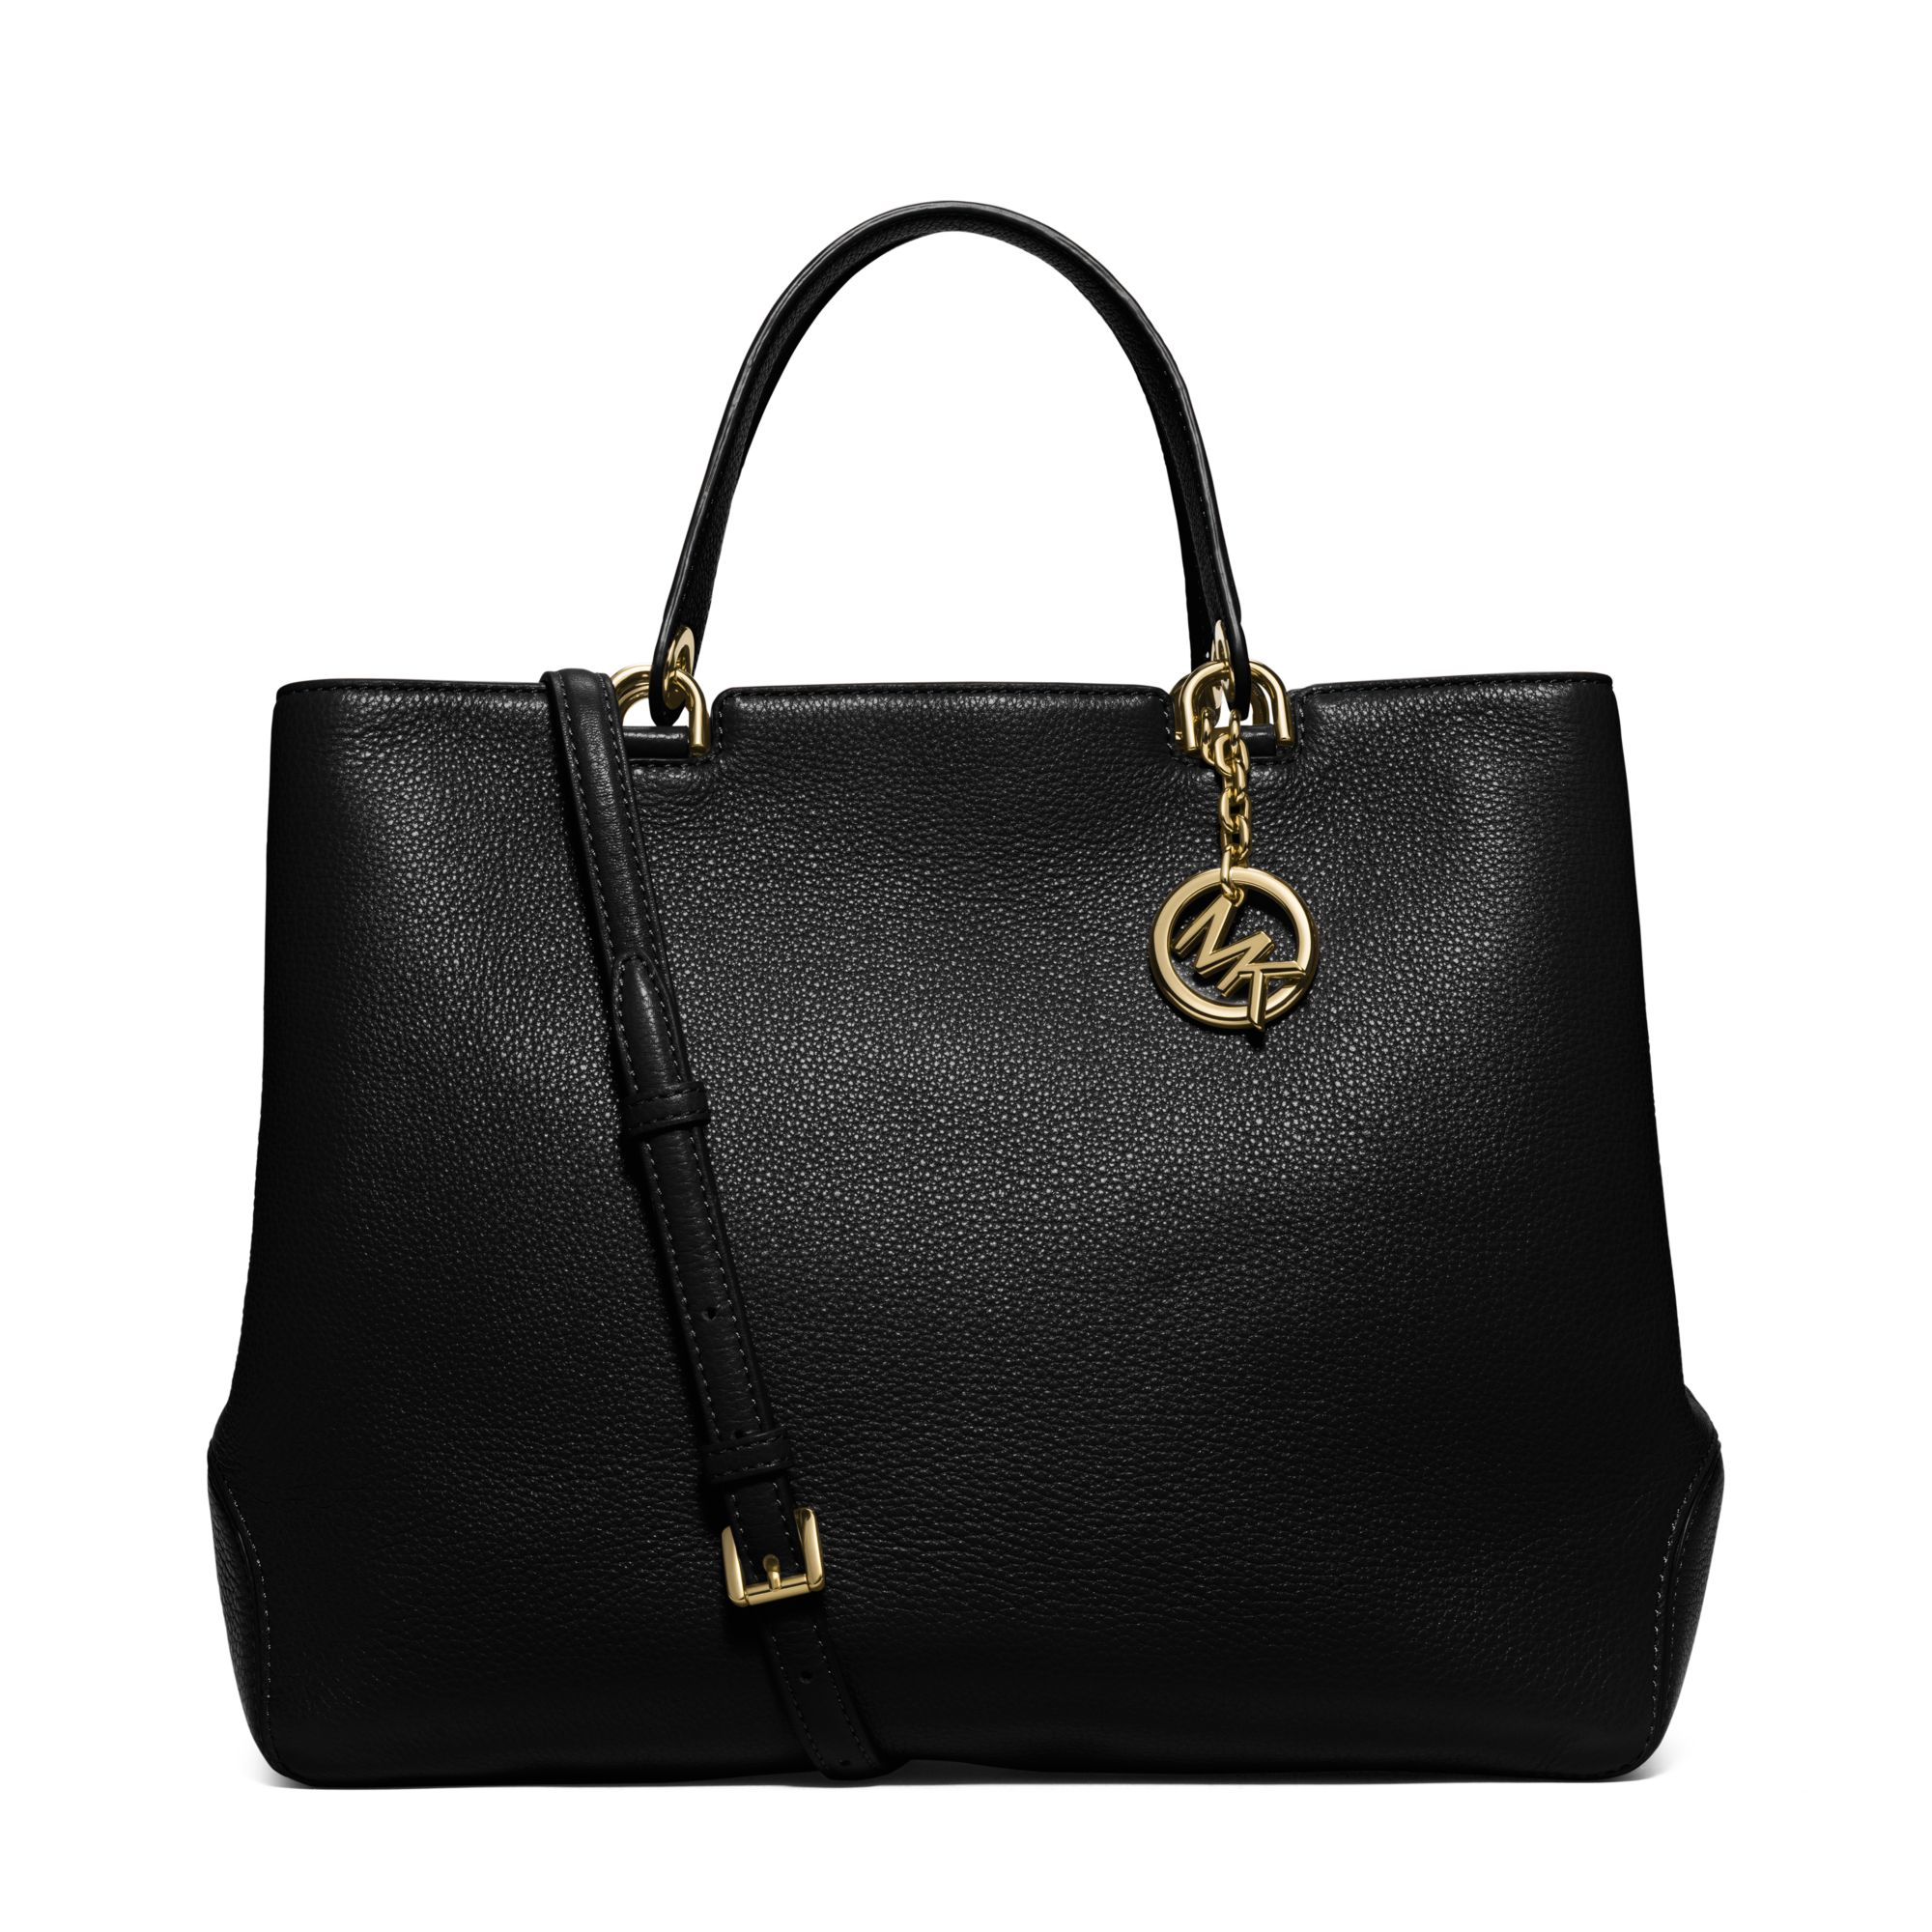 Lyst - Michael kors Anabelle Extra-large Leather Tote in Black